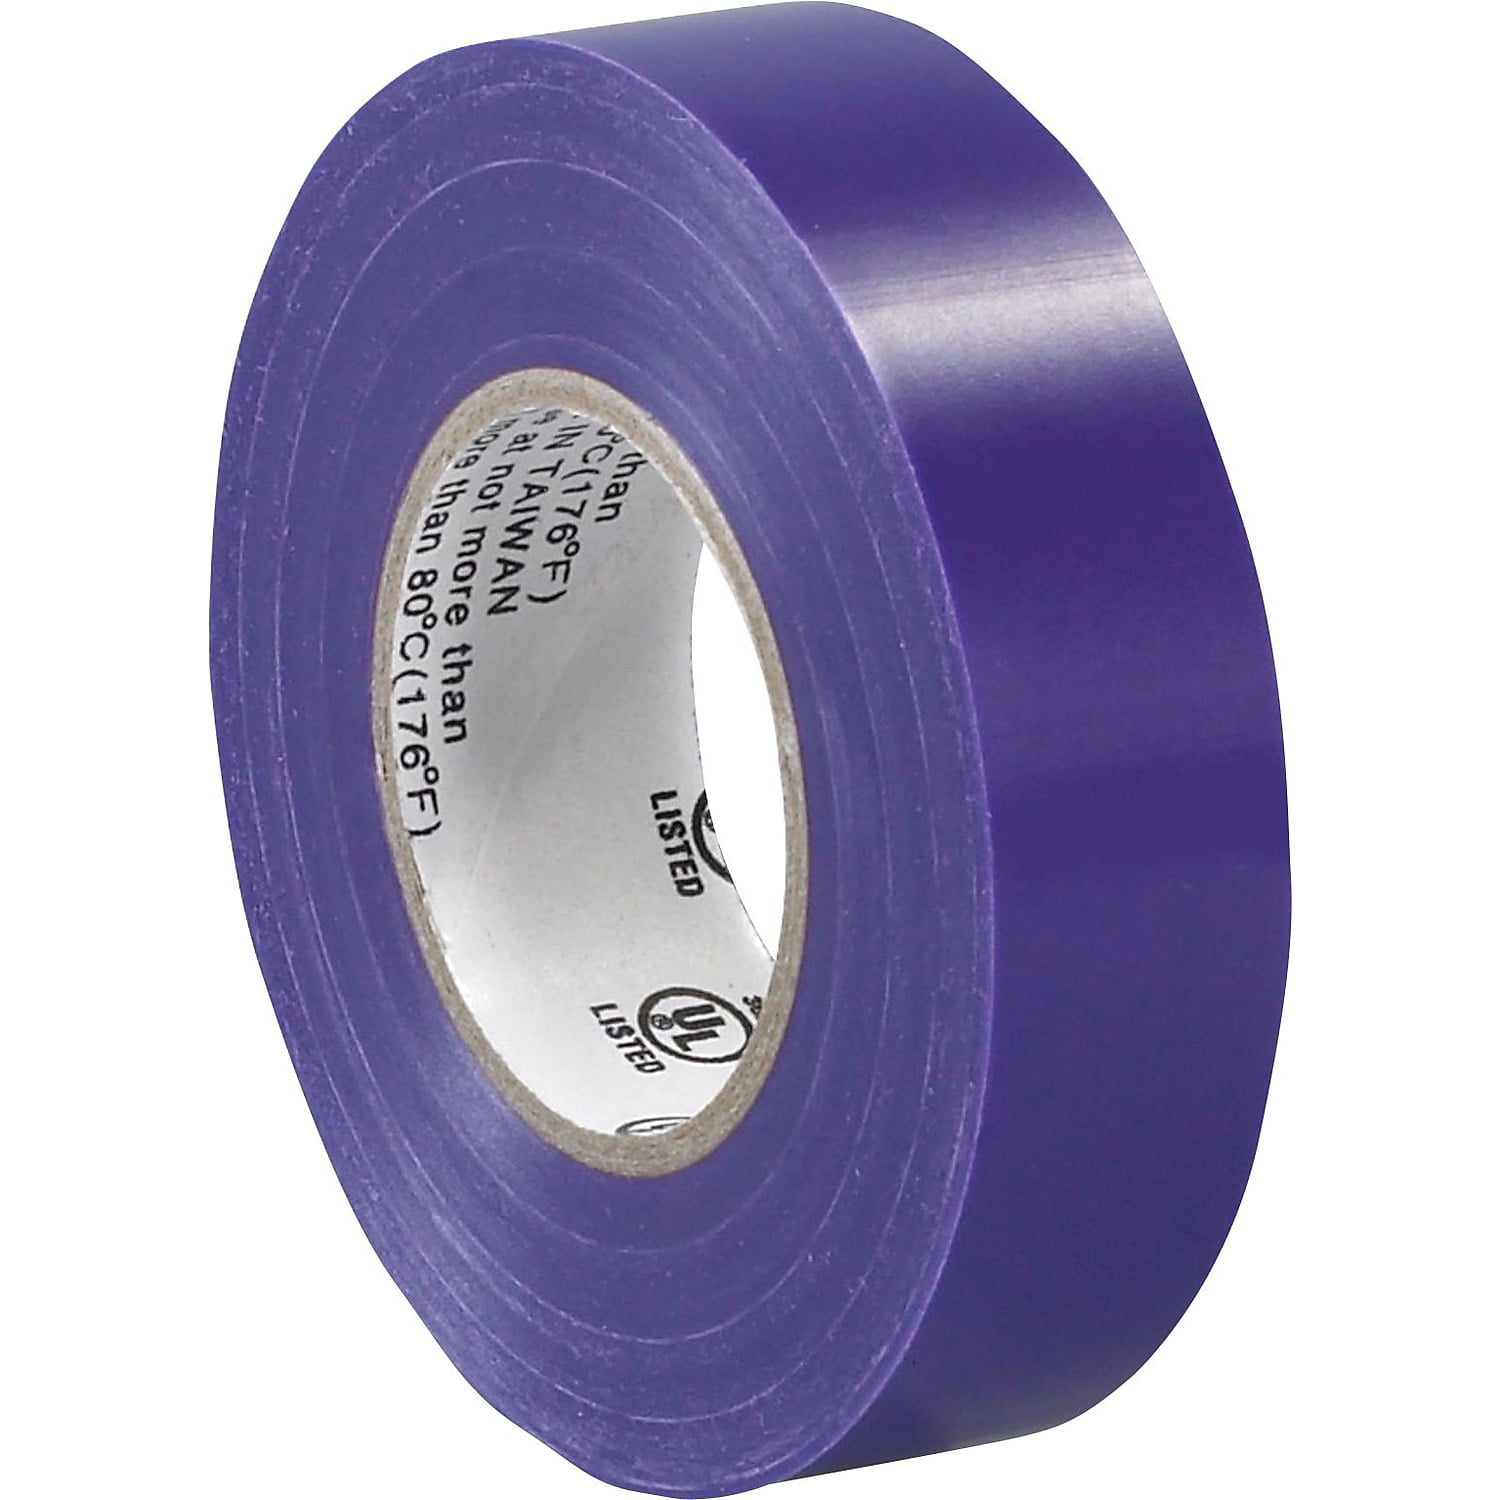 T96461810pkm 0.75 In. X 20 Yards Purple Electrical Tape - Pack Of 10